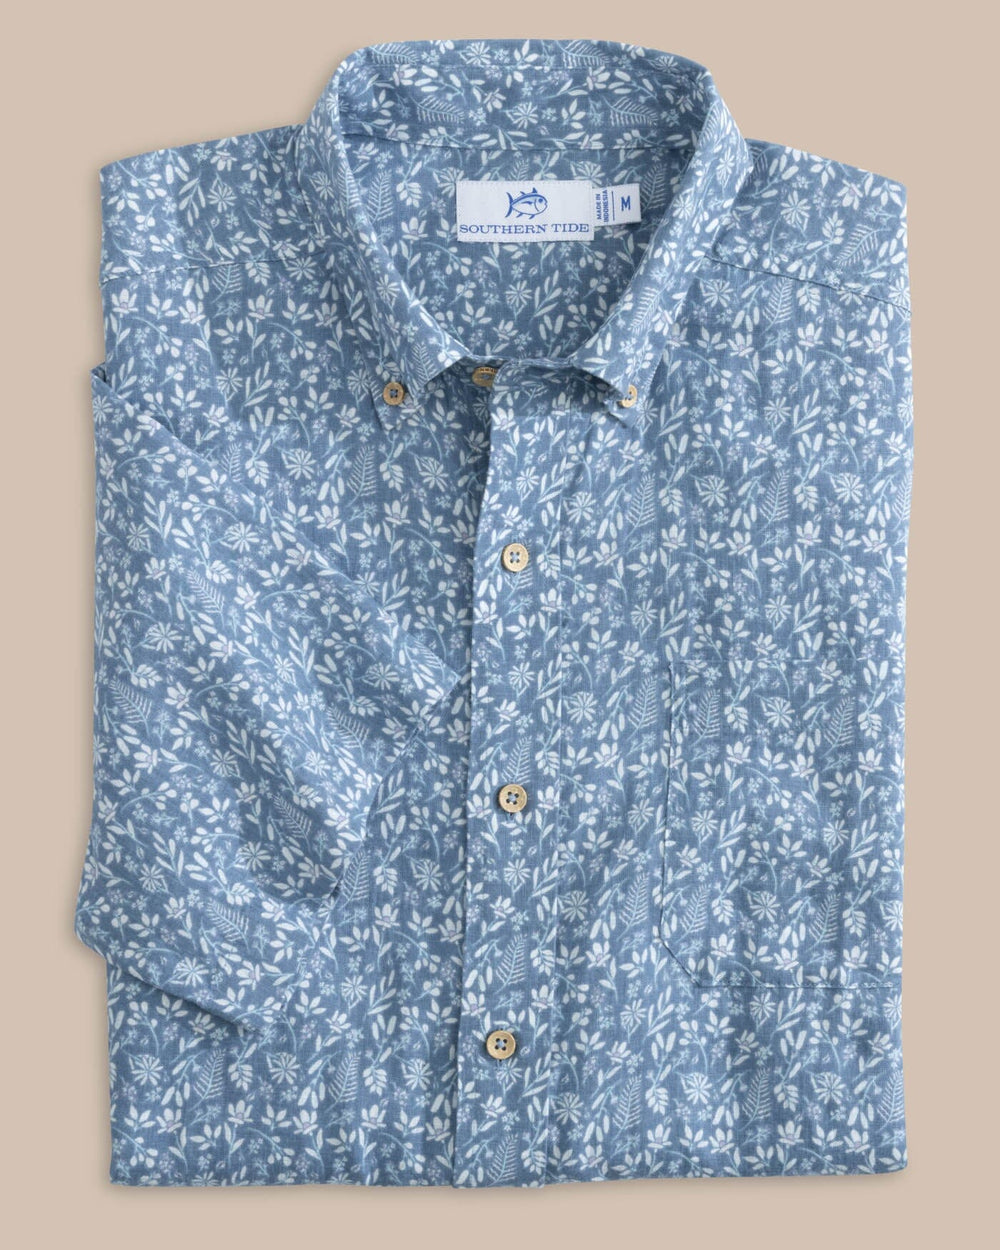 The front view of the Southern Tide Linen Rayon Ditzy Floral Short Sleeve Sport Shirt by Southern Tide - Coronet Blue